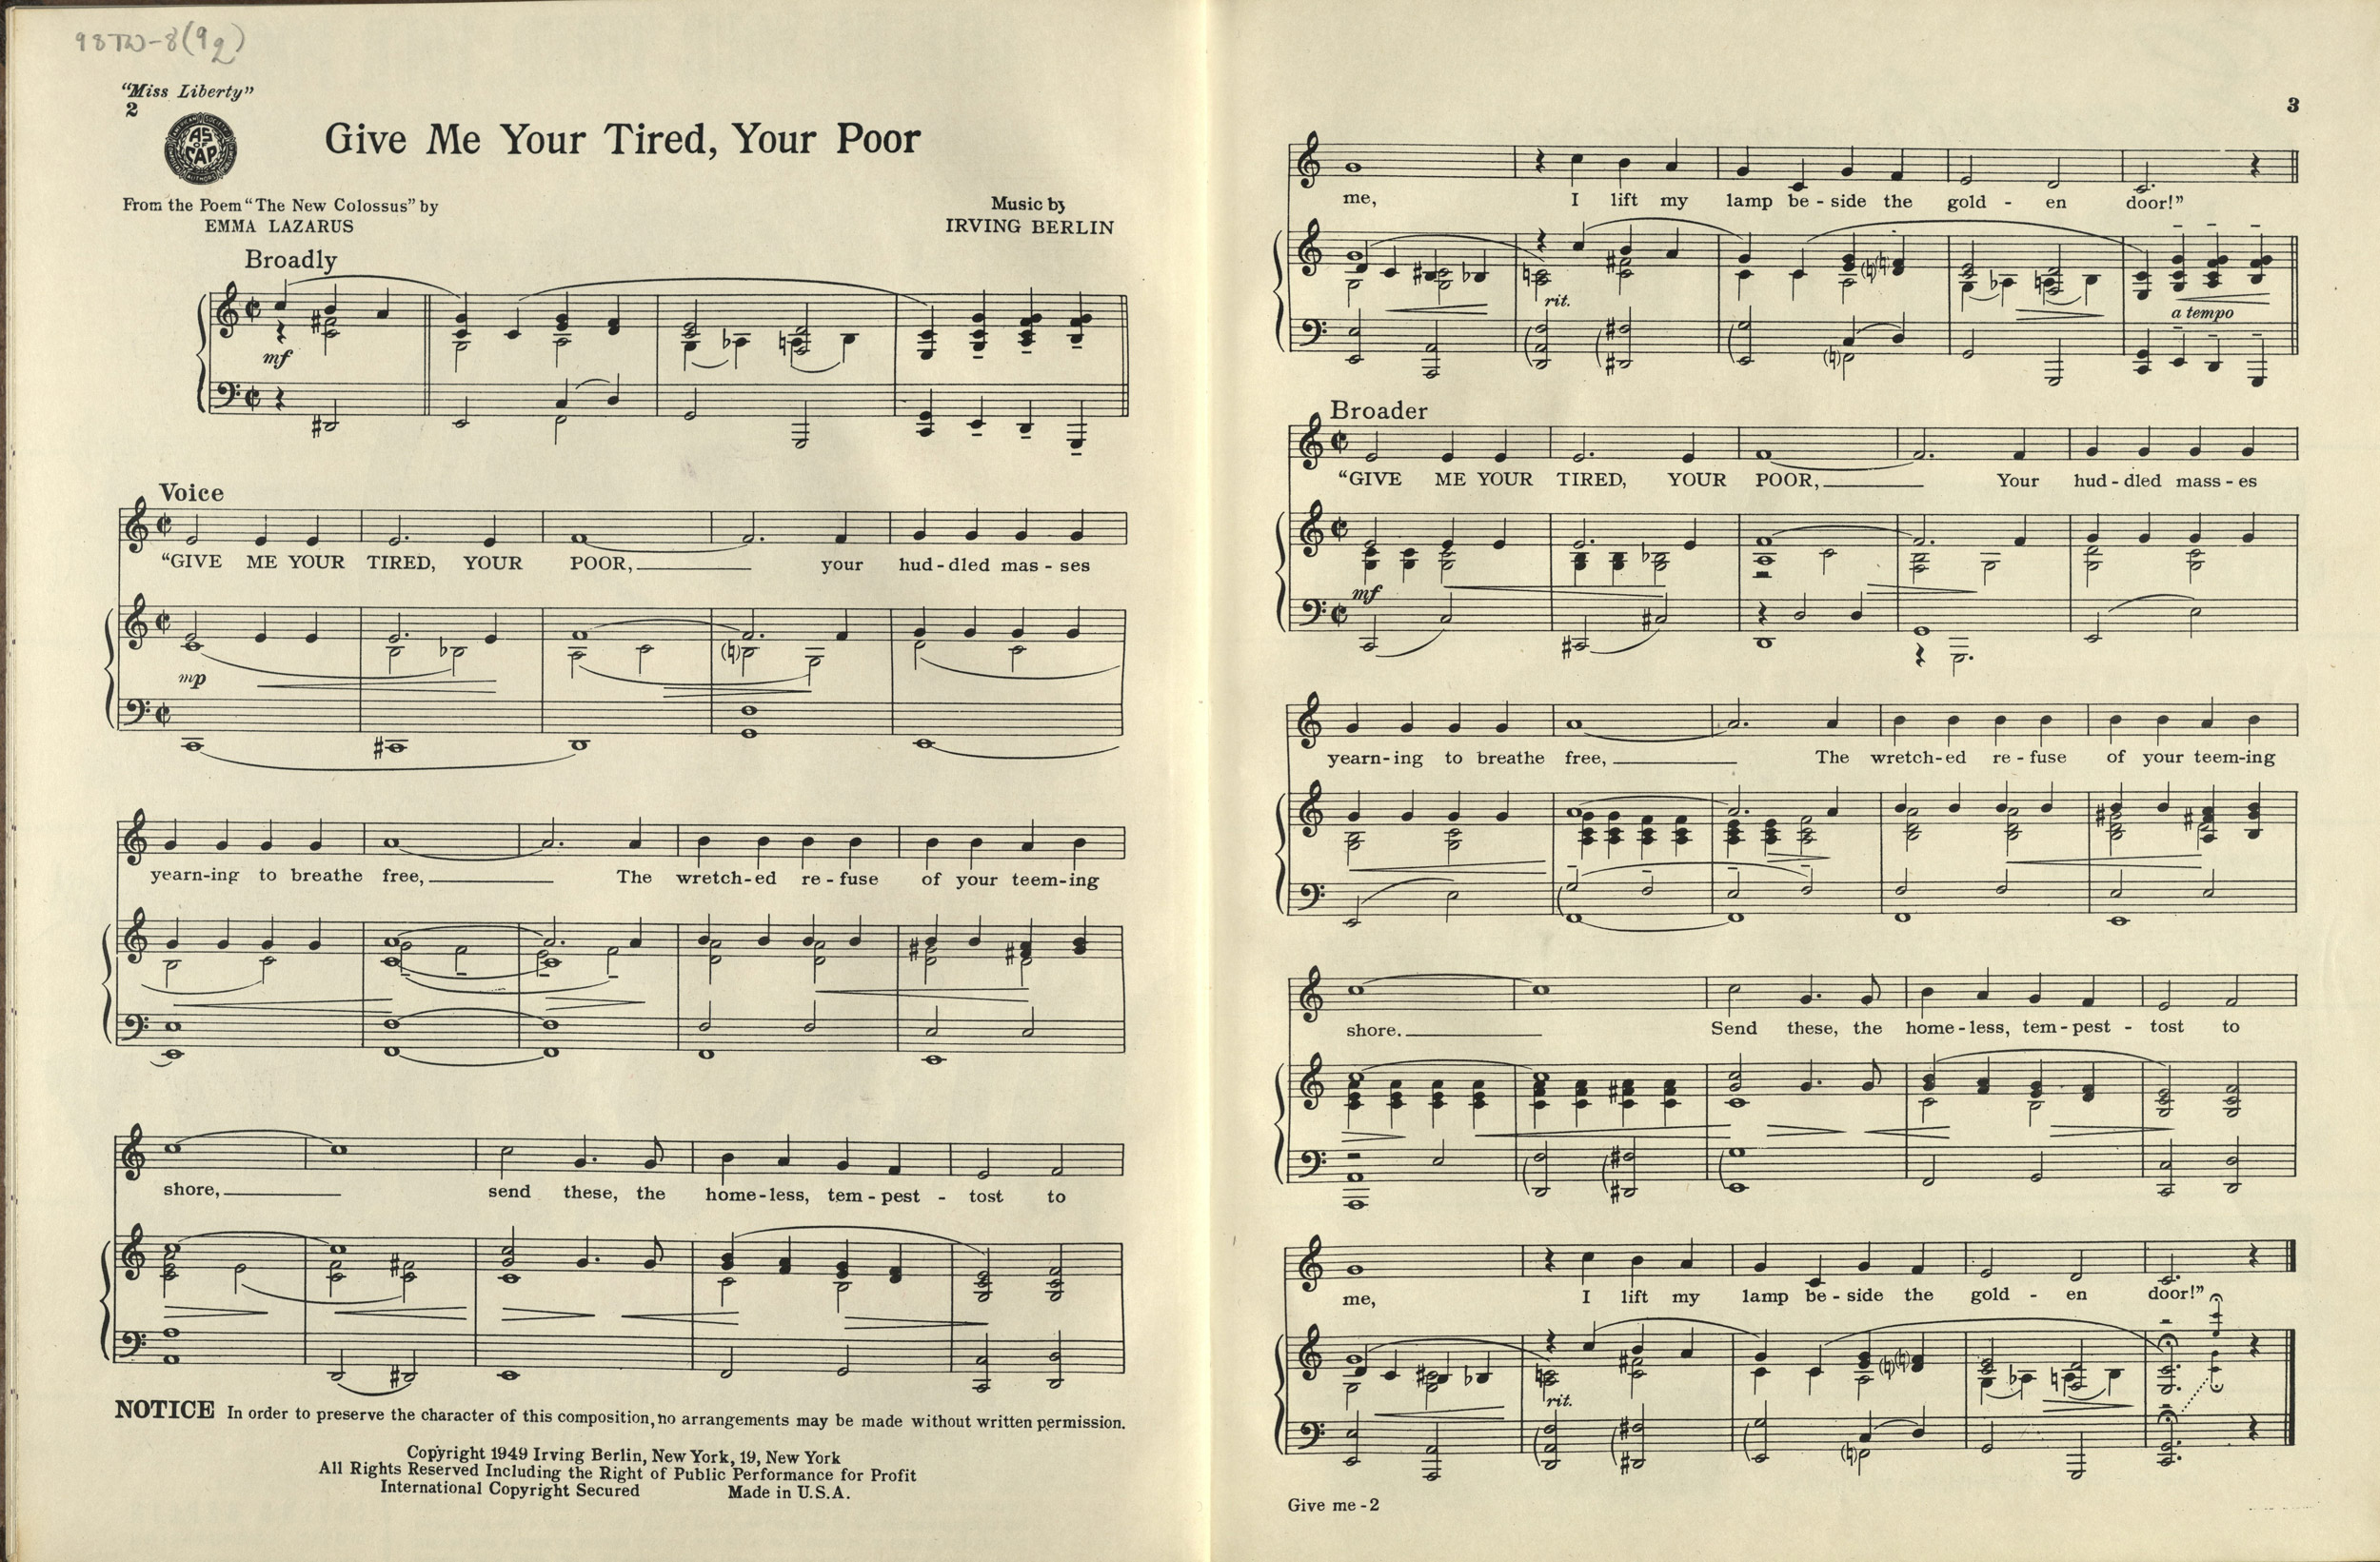 “Give Me Your Tired, Your Poor” by Irving Berlin, 1949.